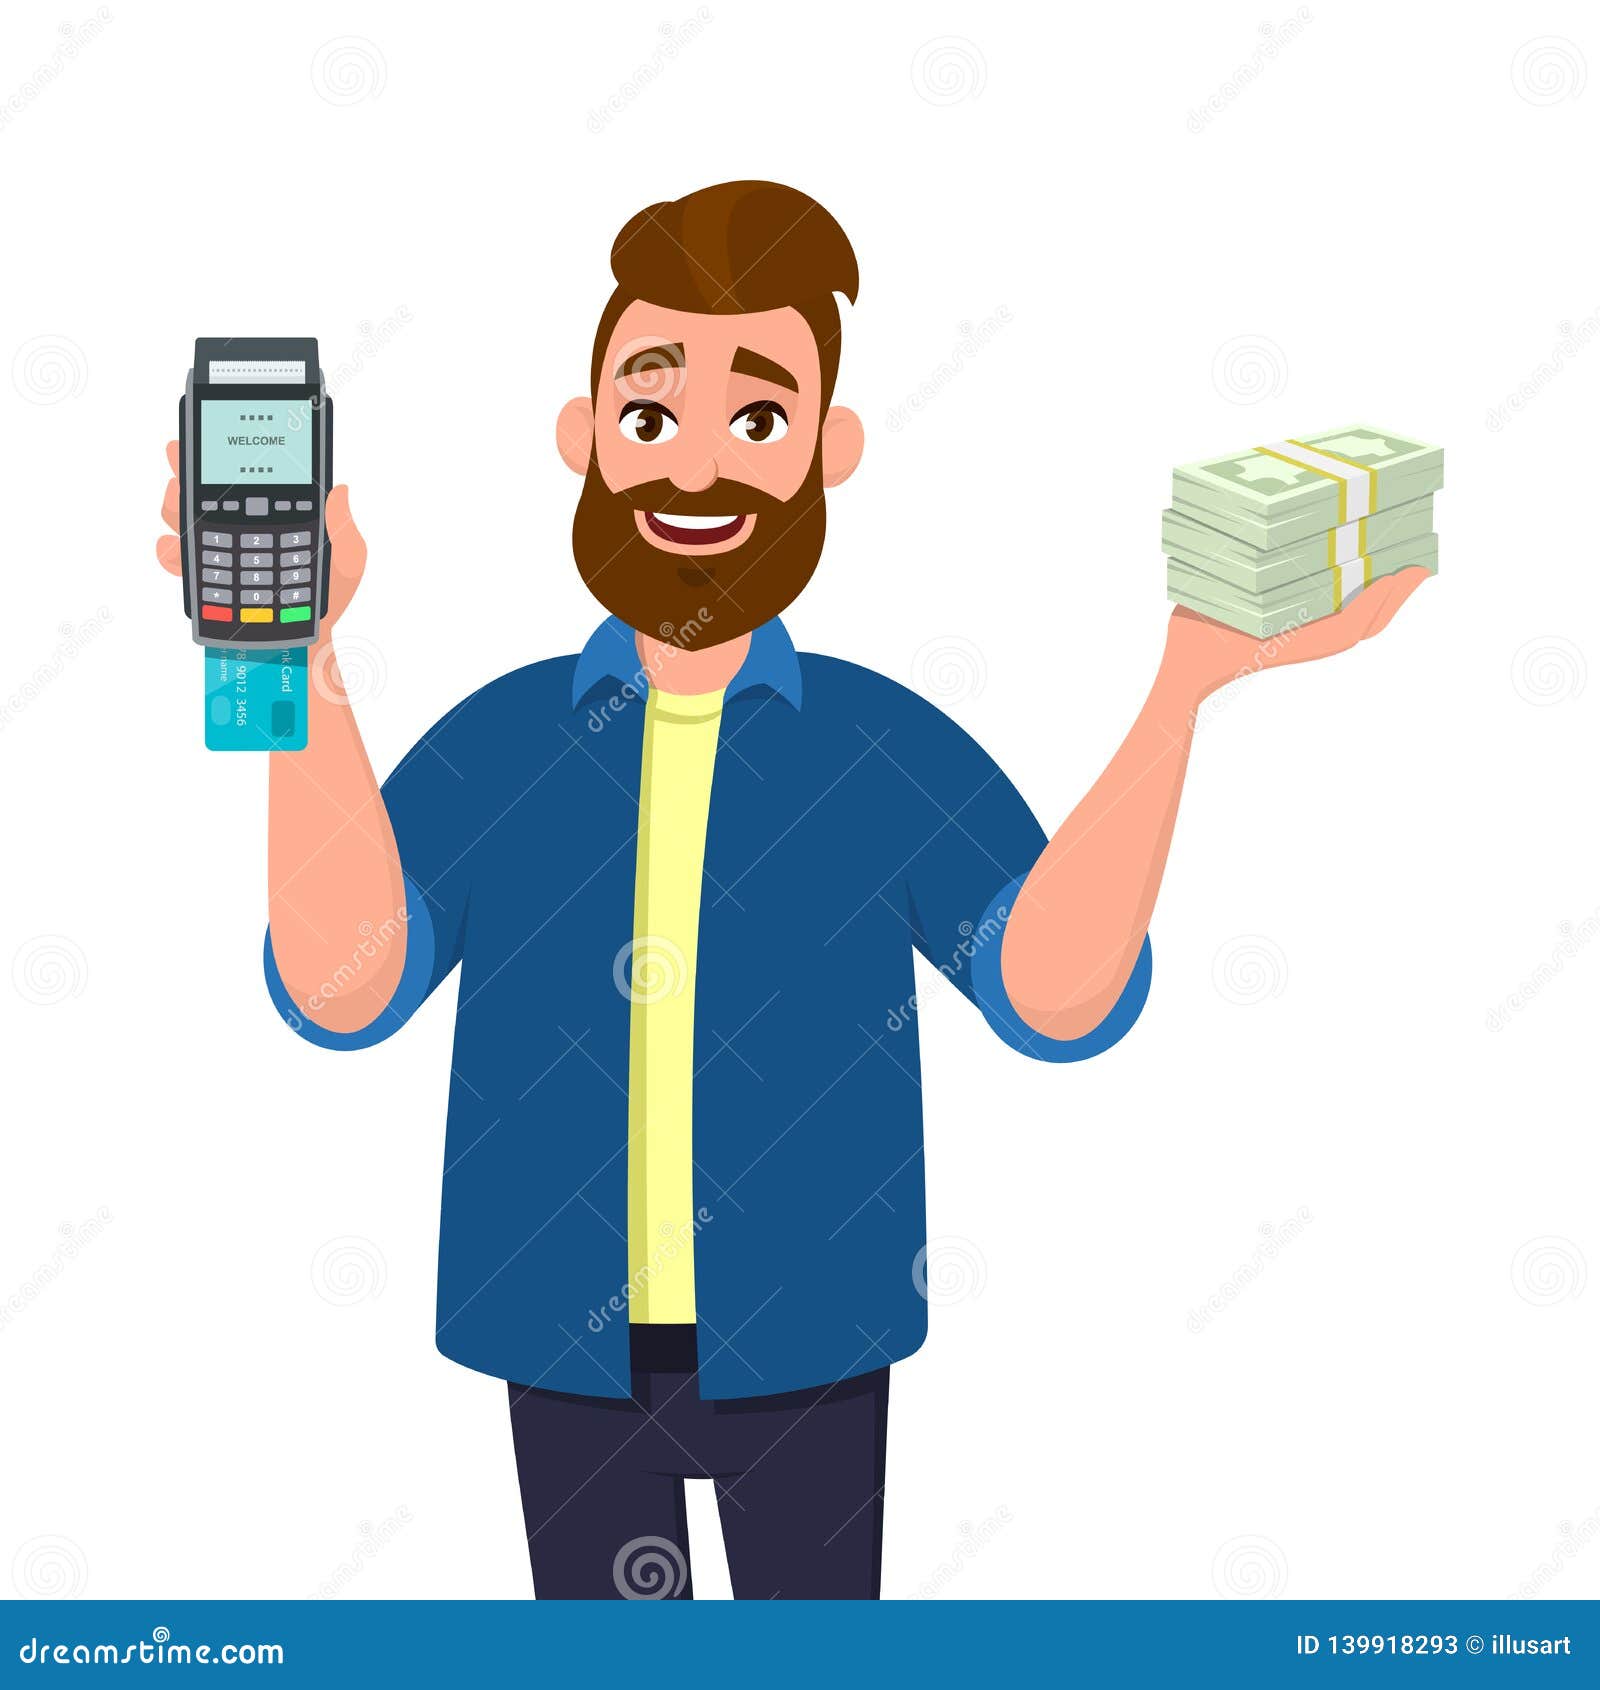 man is showing or holding a pos terminal or credit, debit card swiping payment machine and bunch or cash, money, currency, bank.